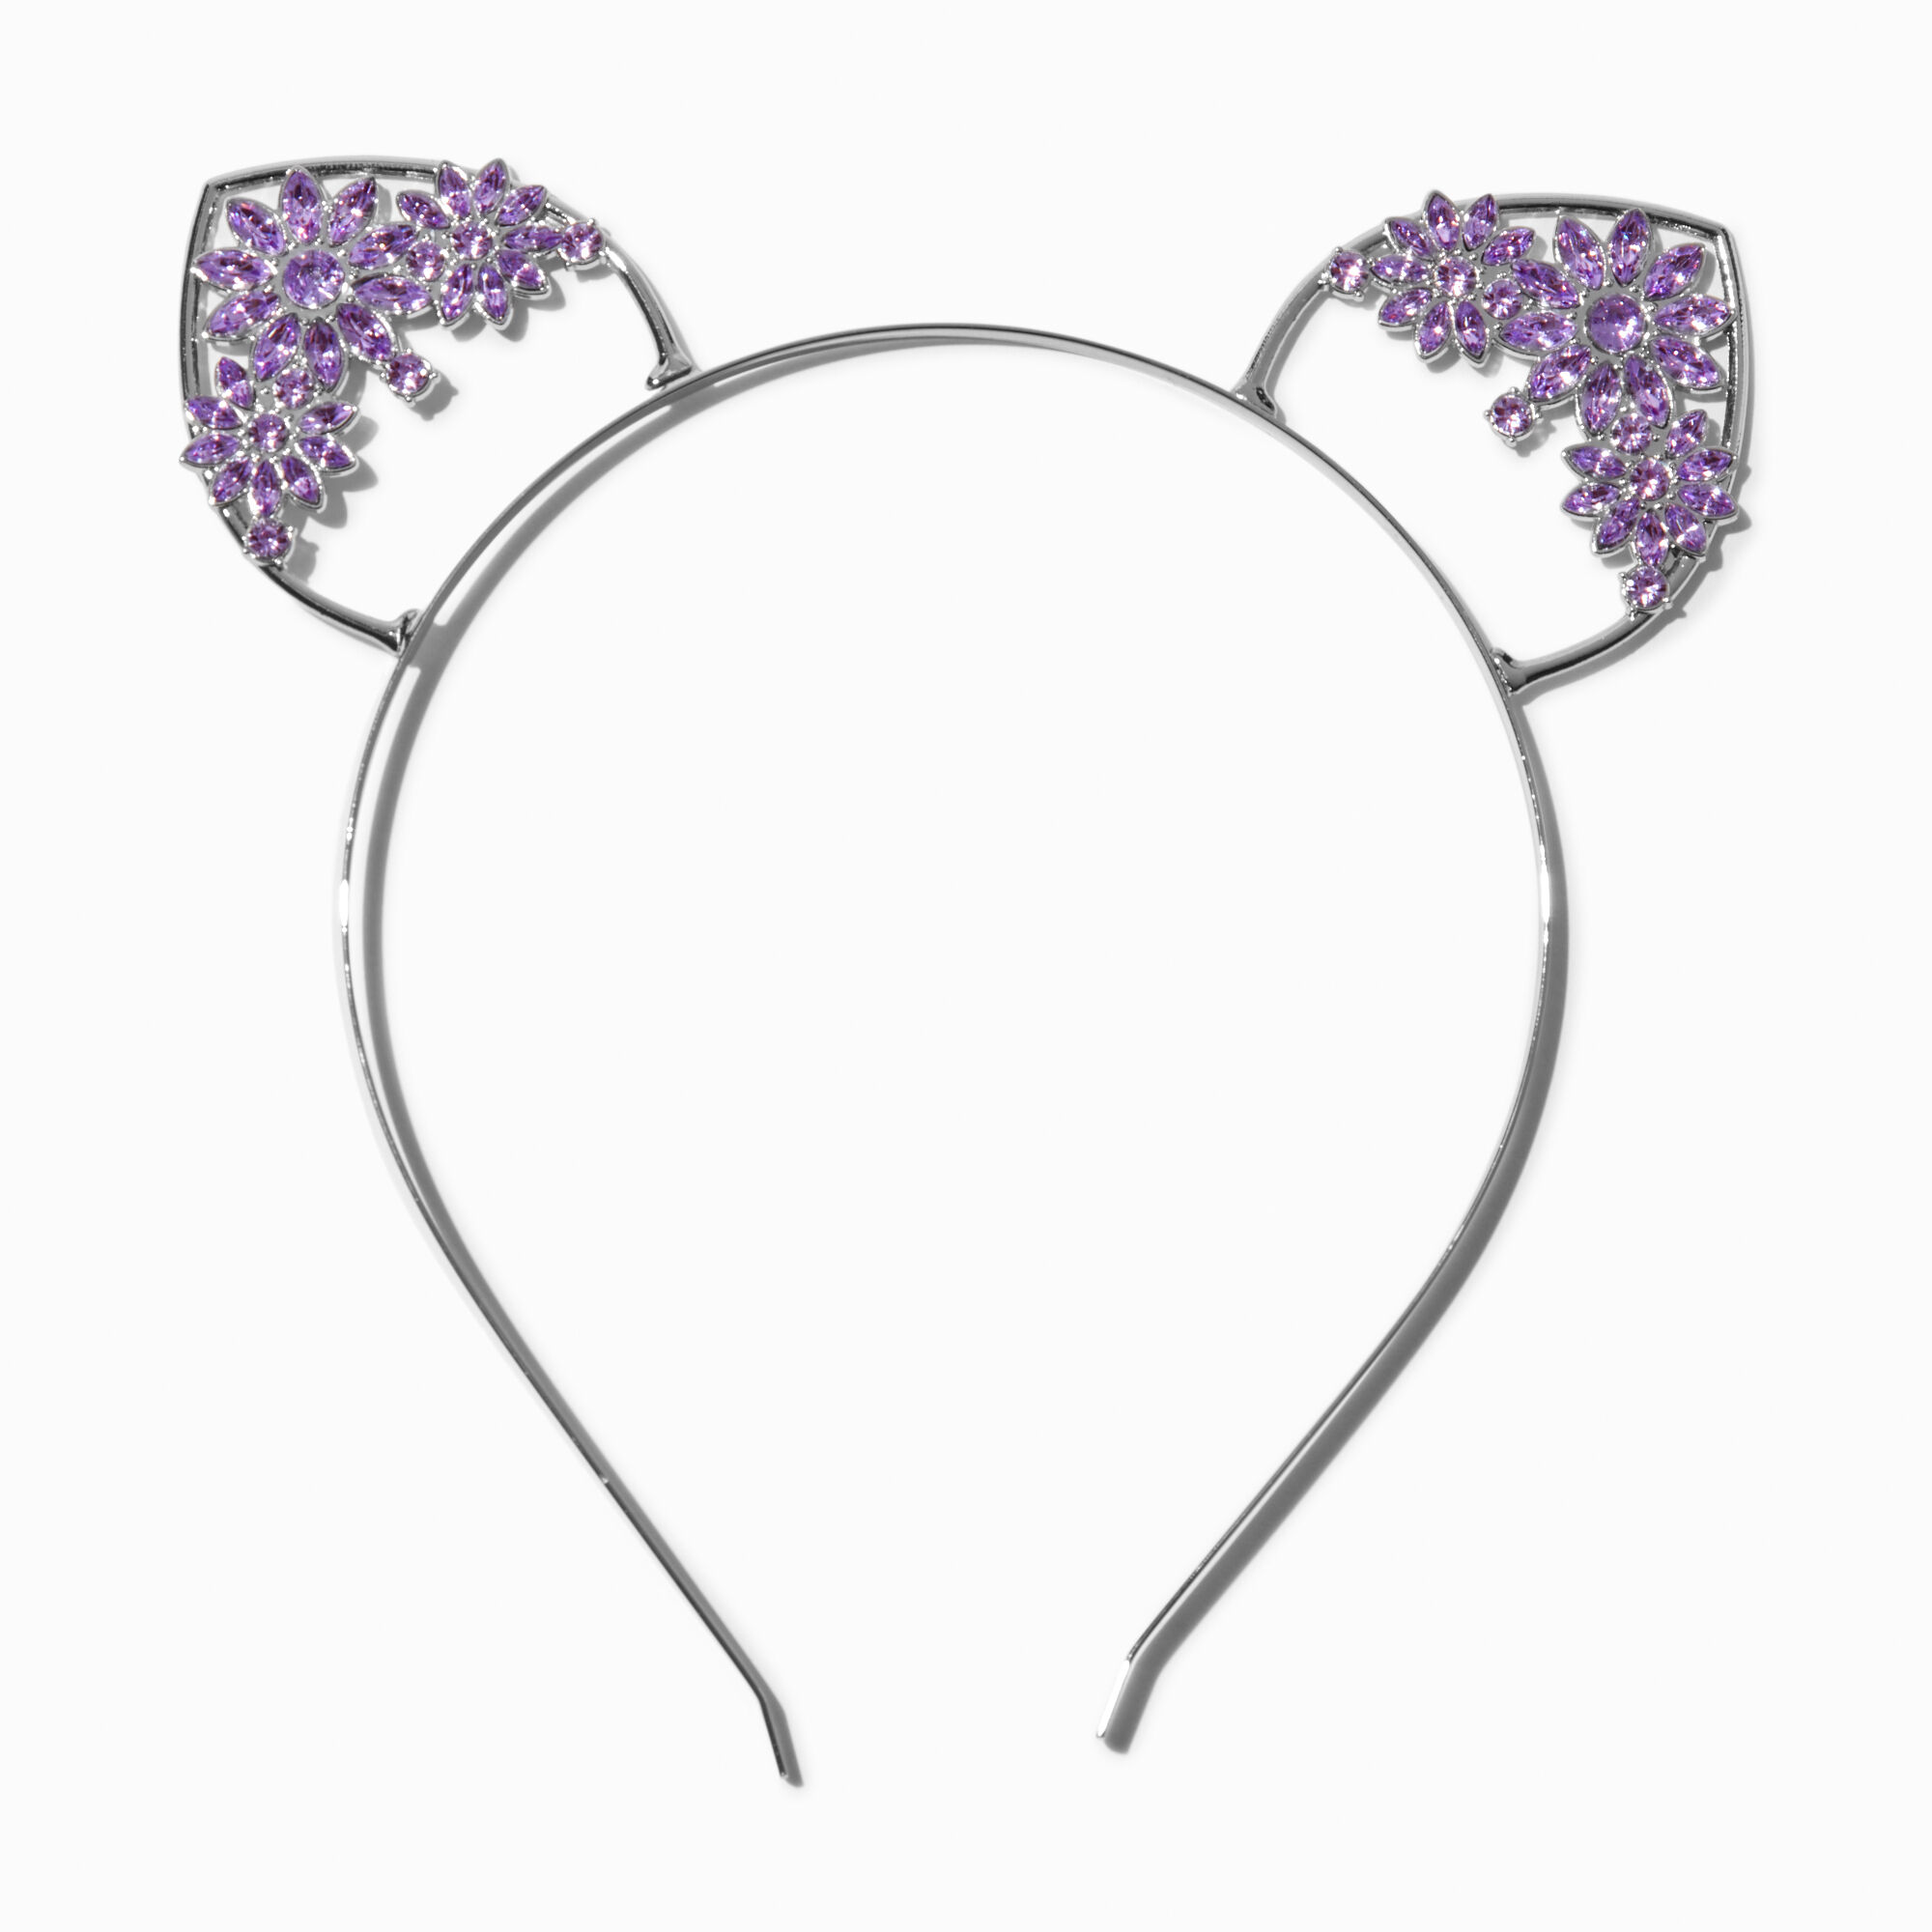 View Claires Purple Flower Cat Ears Headband Silver information